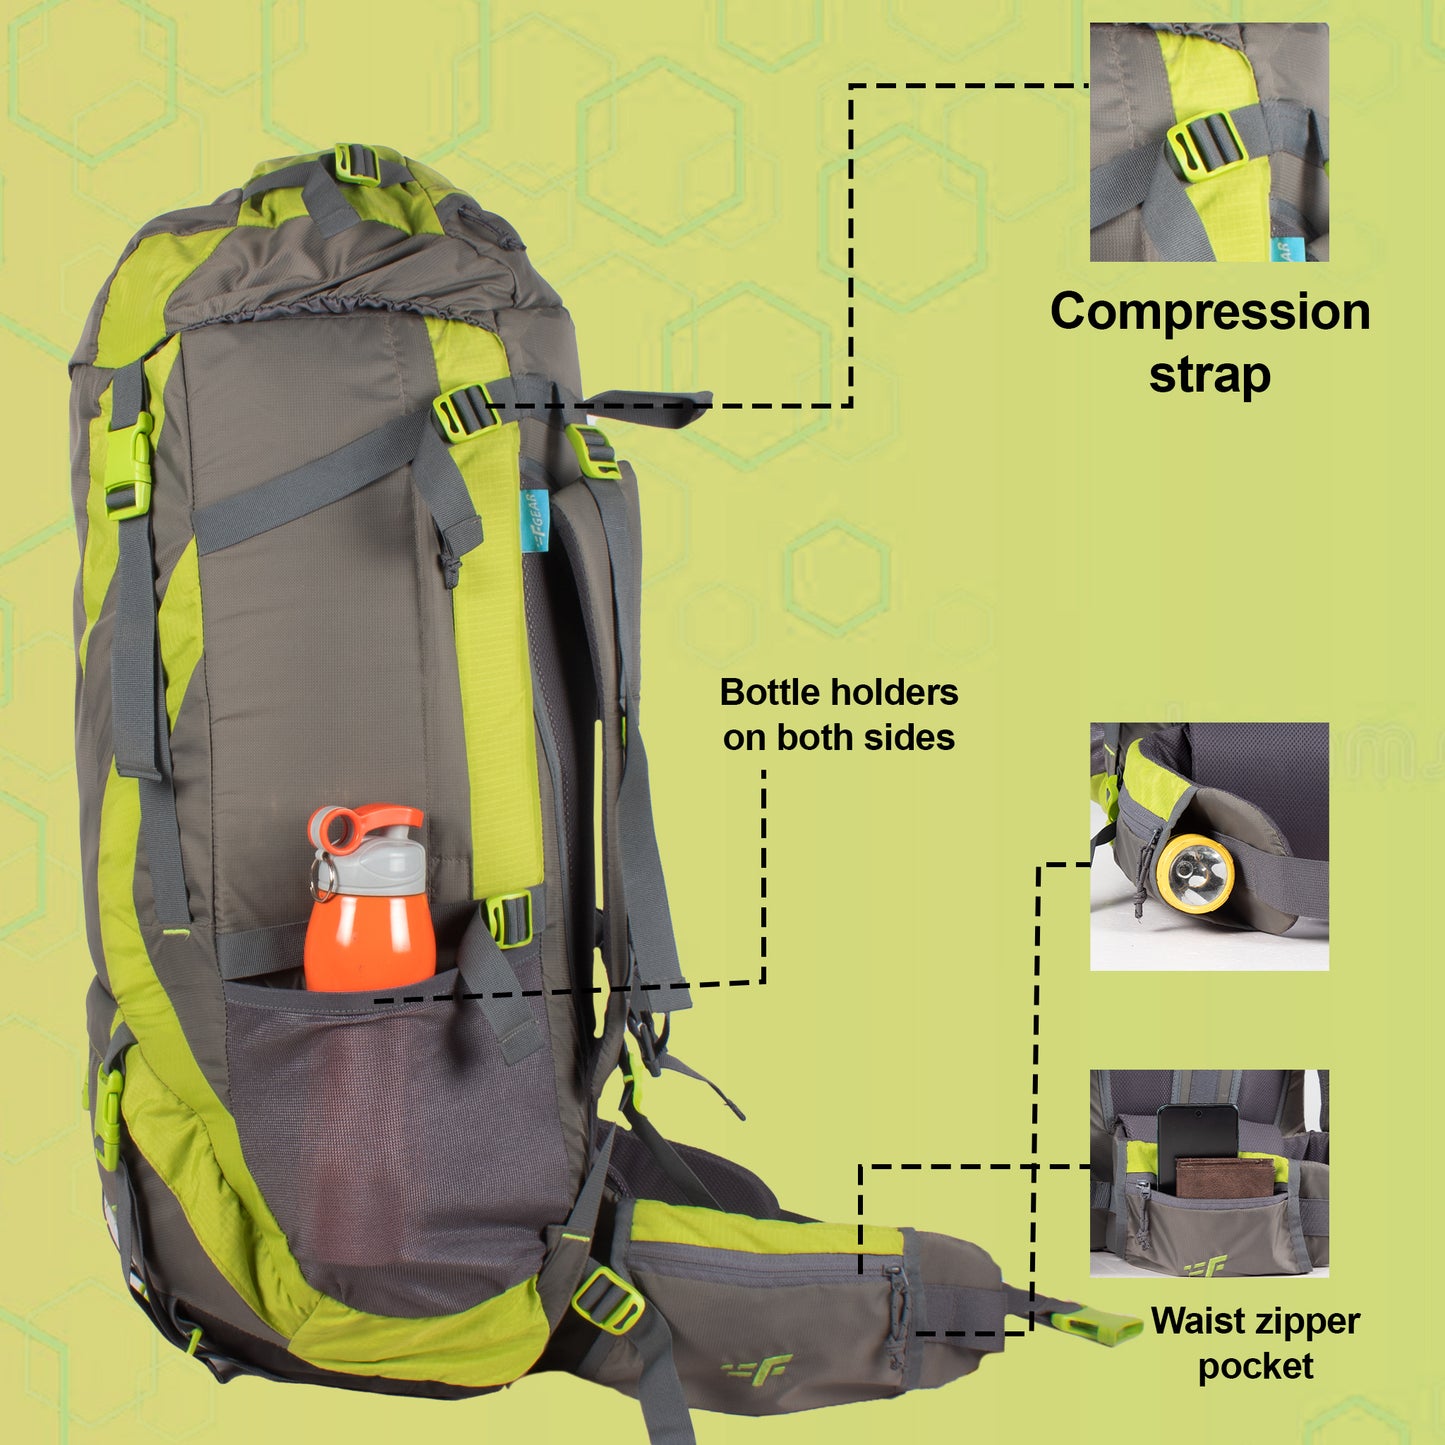 Penny 75L Green Gry Rucksack with Rain Cover